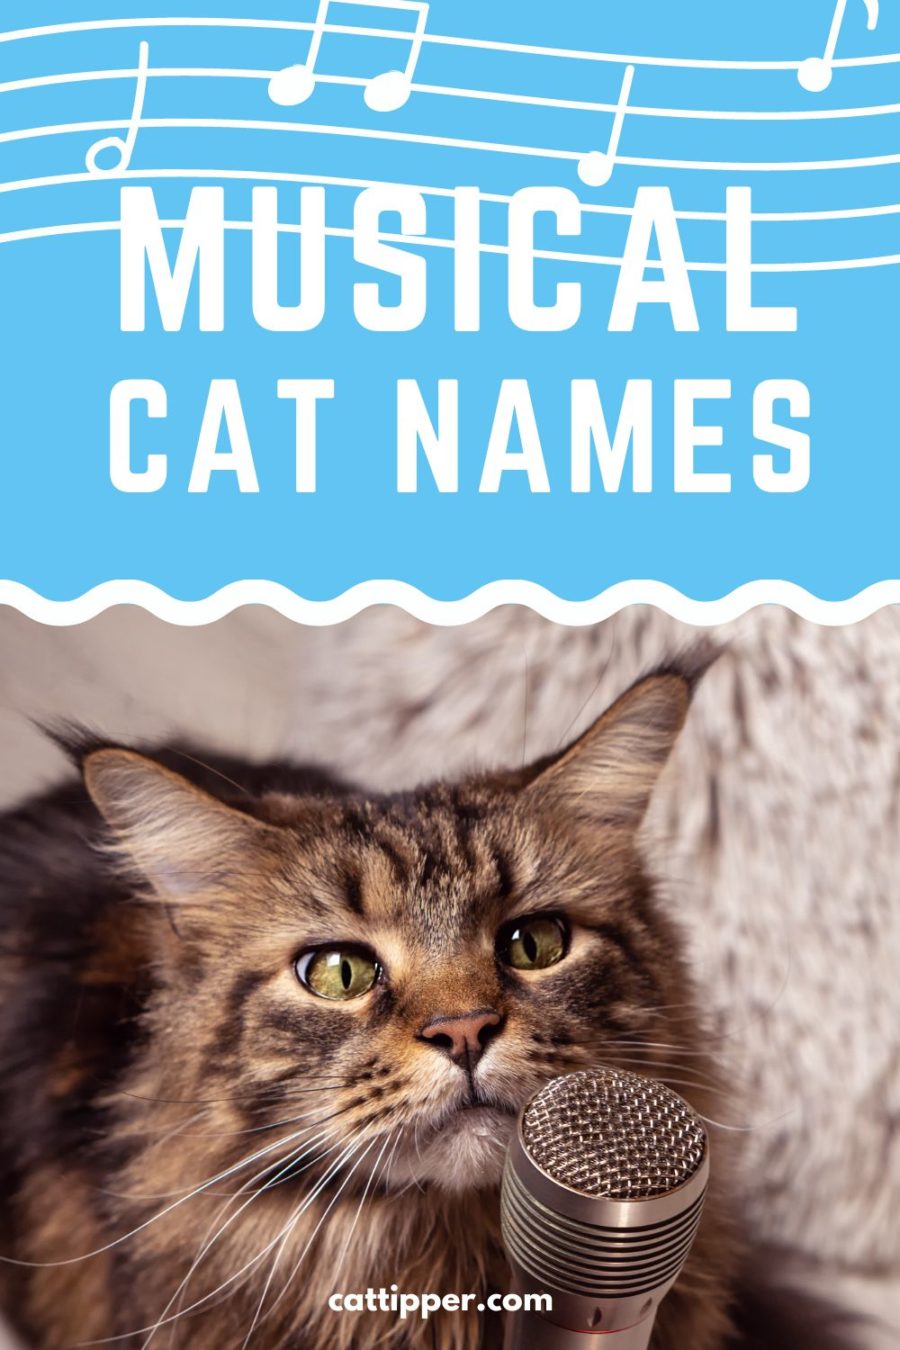 450+ Music Cat Names (from Rap to Rock, Country to Pop)